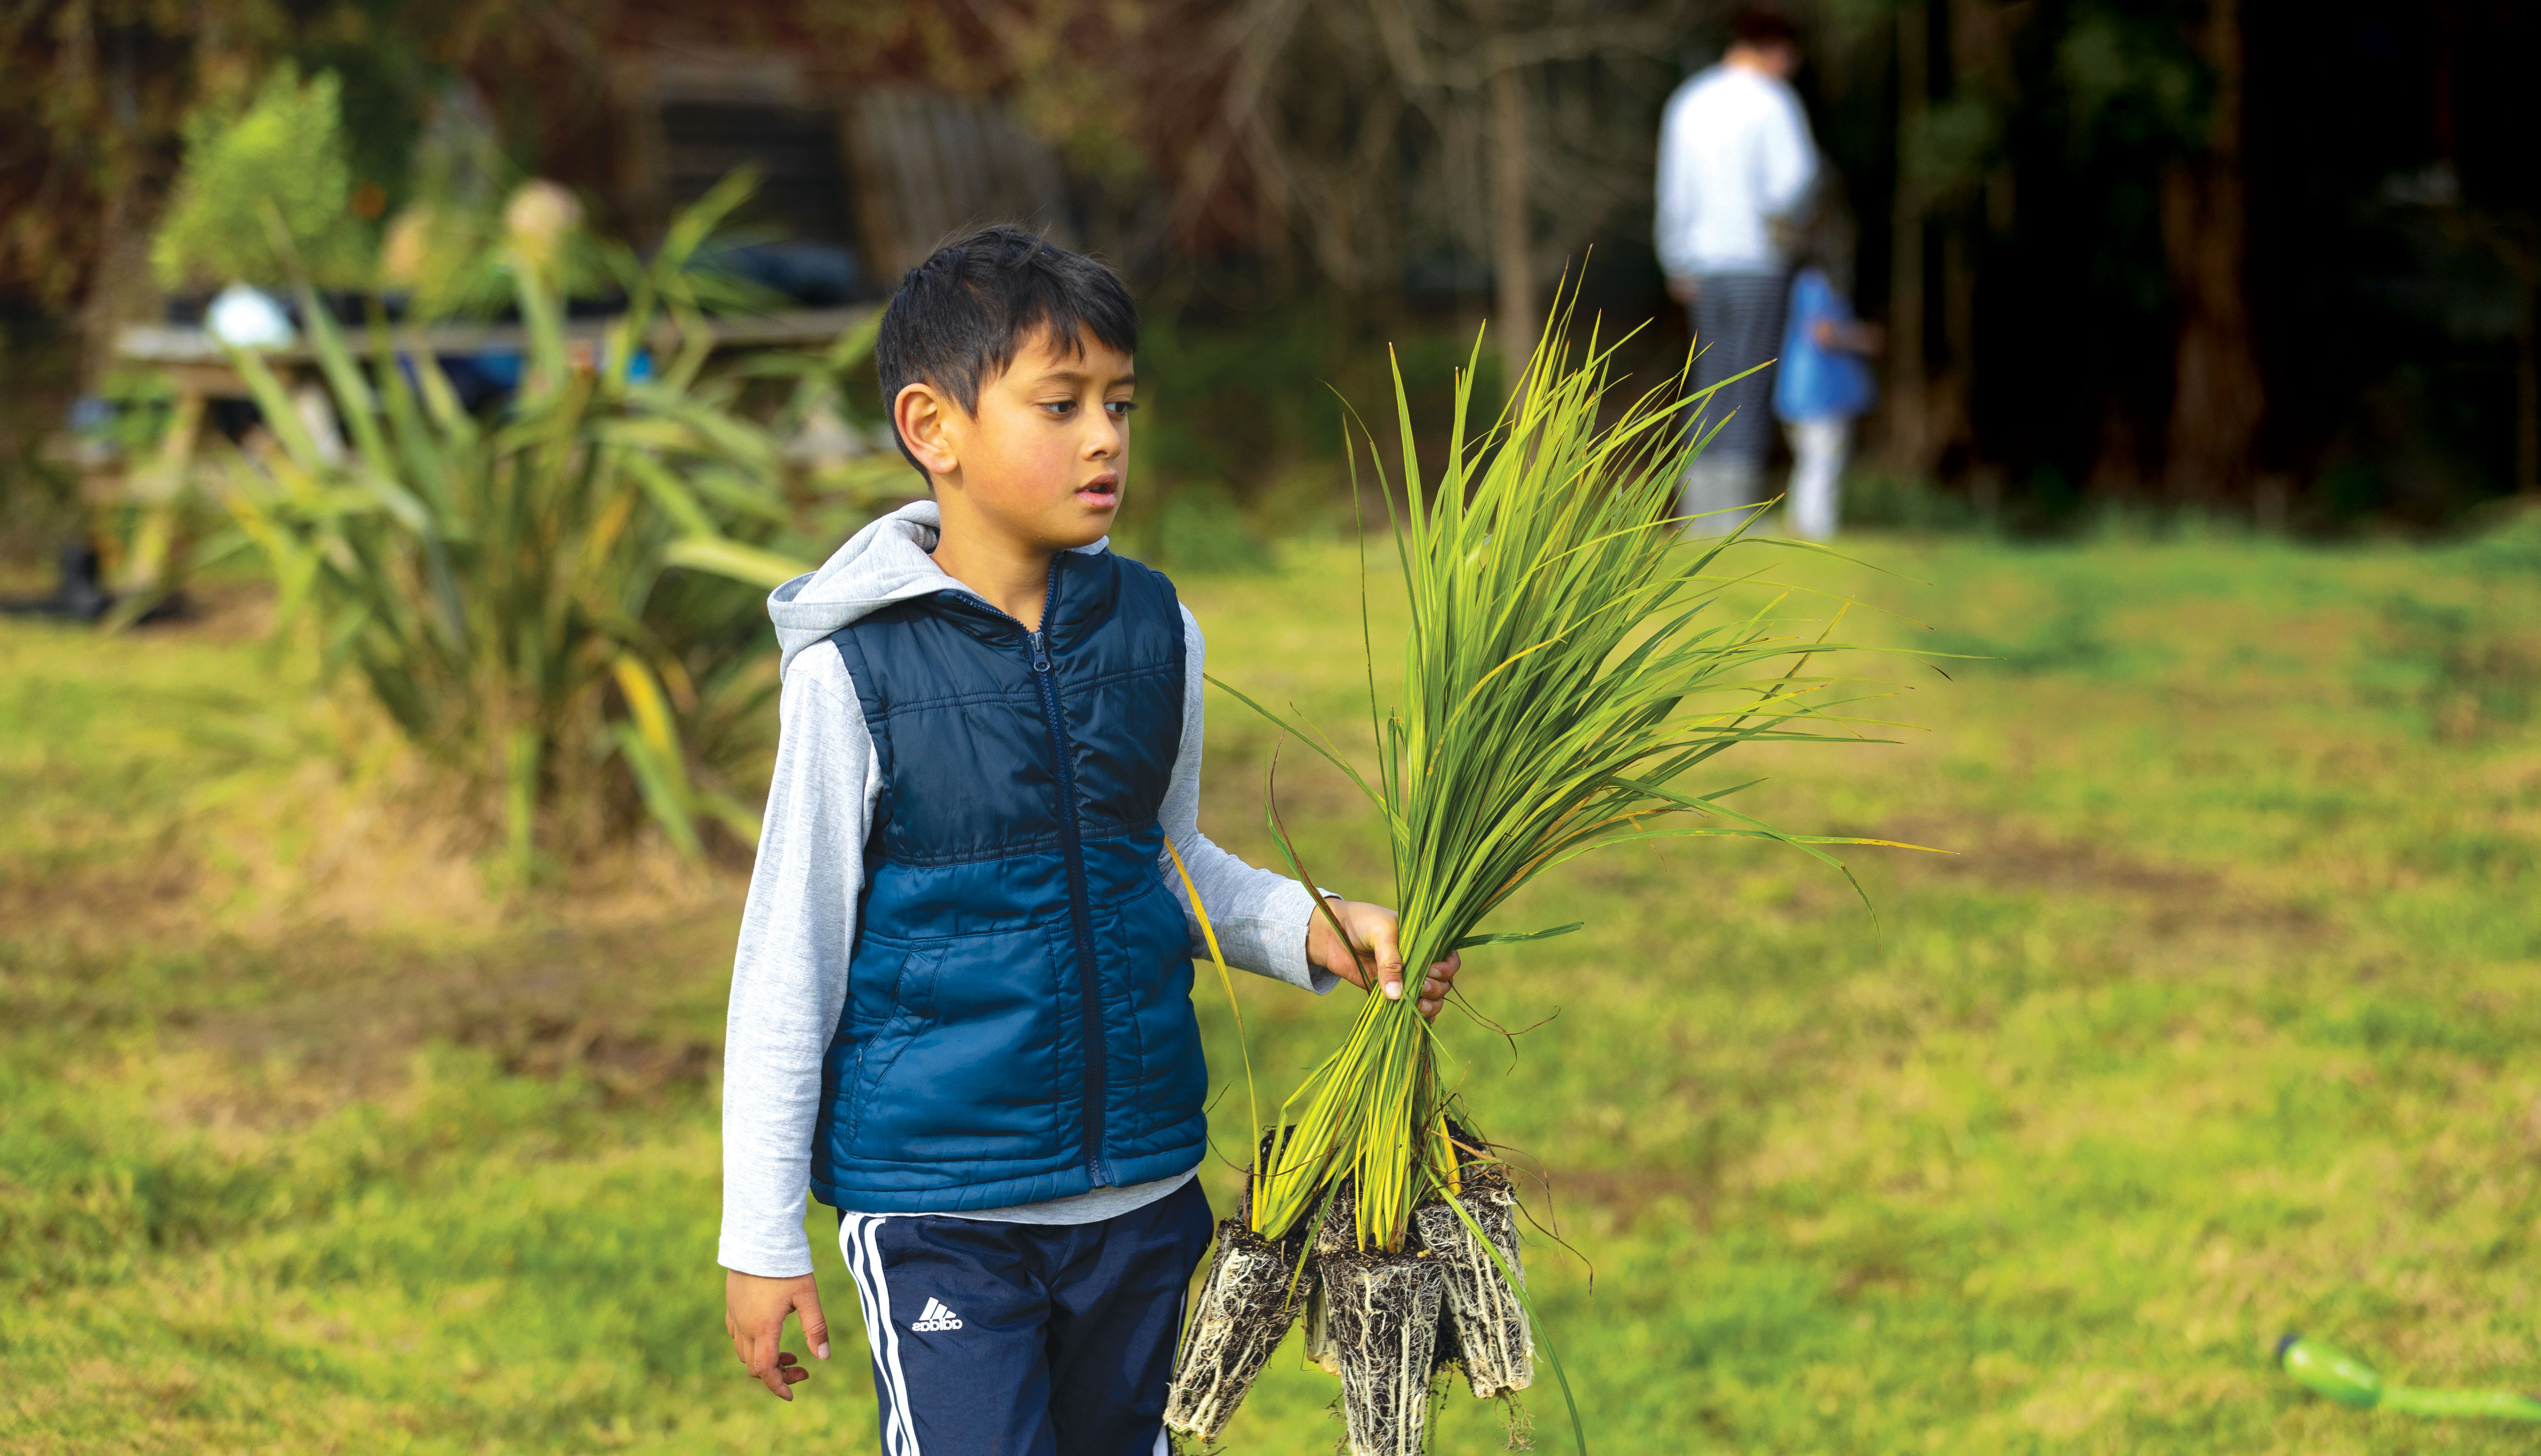 Boy with plants in his hand. (Photo credit: Dawn Dutton).